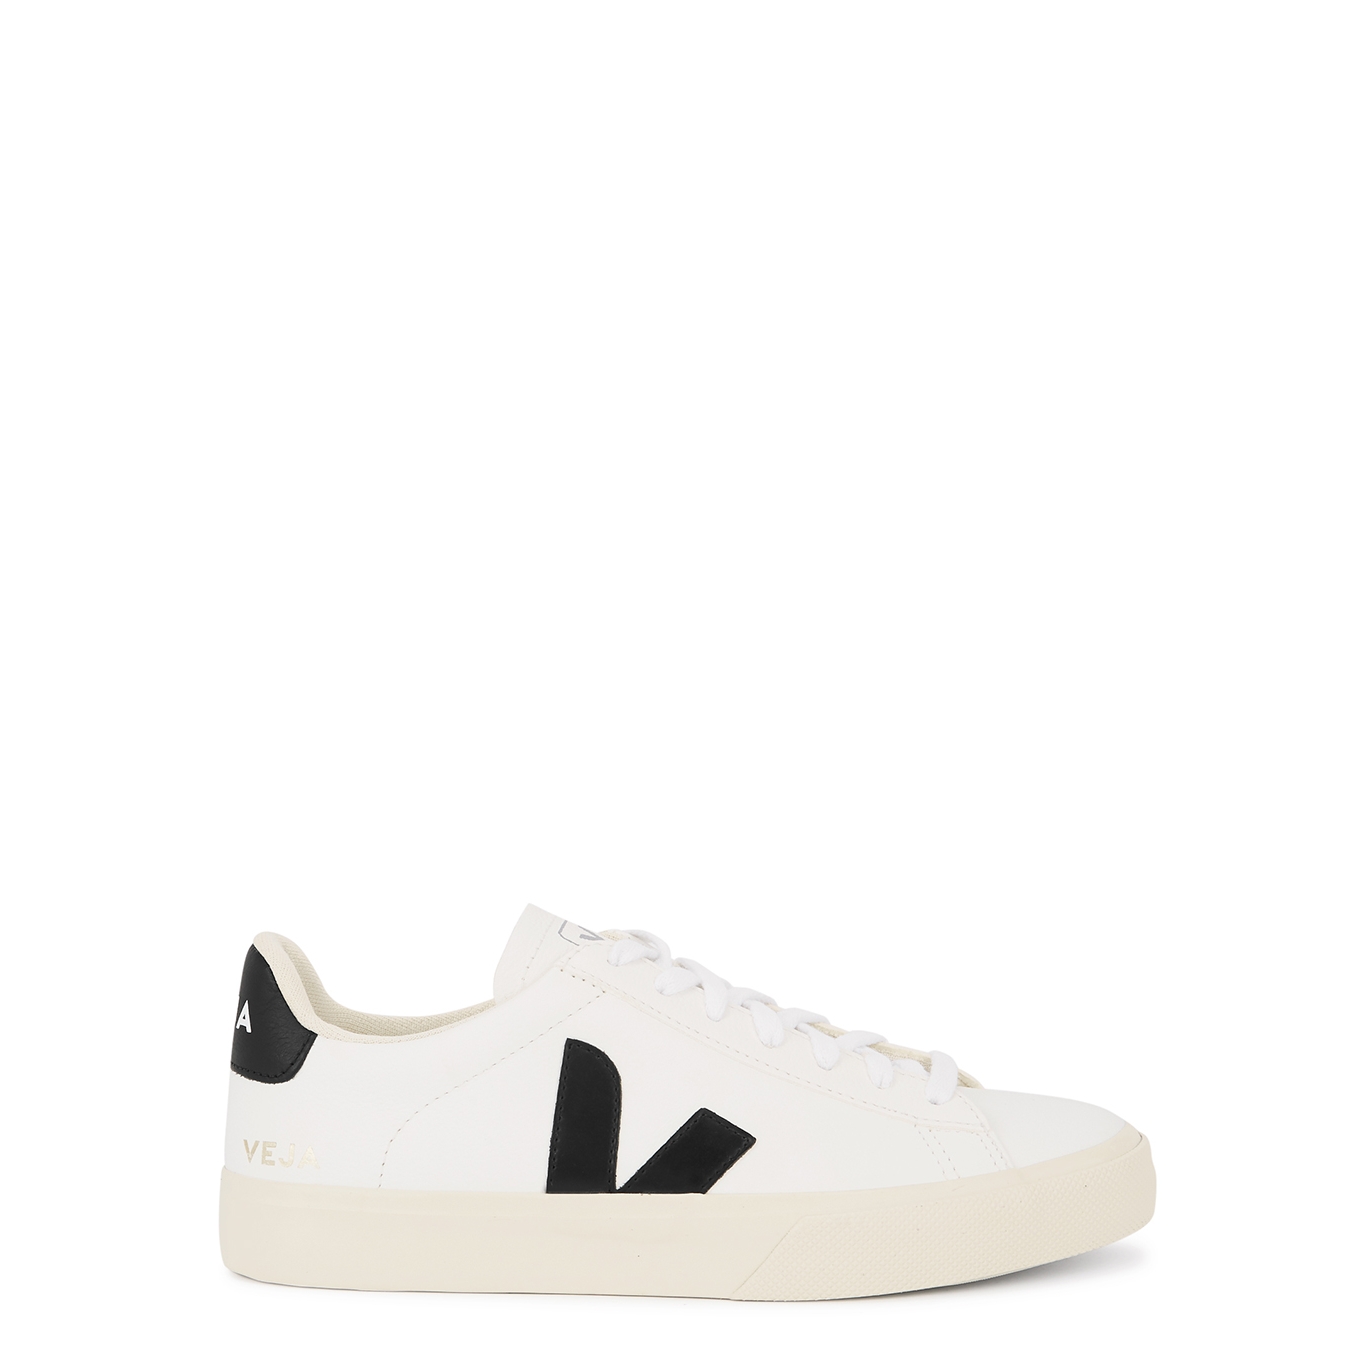 Veja Trainers Go With Everything in Our Wardrobe Right Now | Who What ...